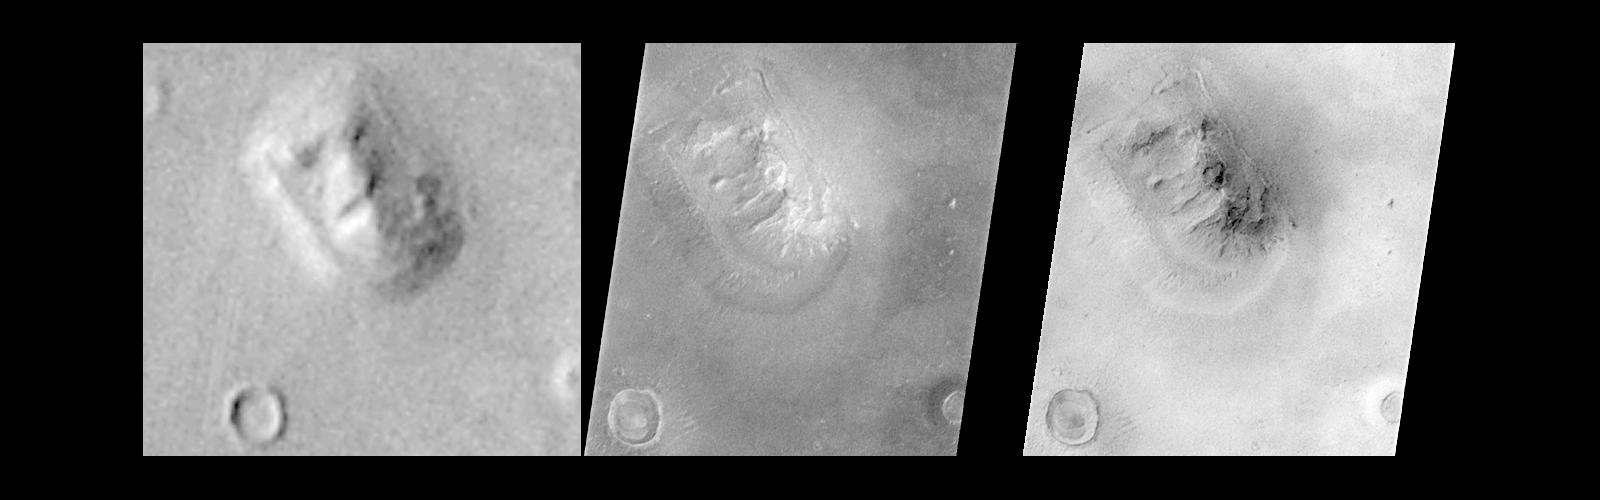 The Mars Orbiter Camera (MOC) on the Mars Global Surveyor (MGS) spacecraft successfully acquired a high resolution image of the "Face on Mars" feature in the Cydonia region.